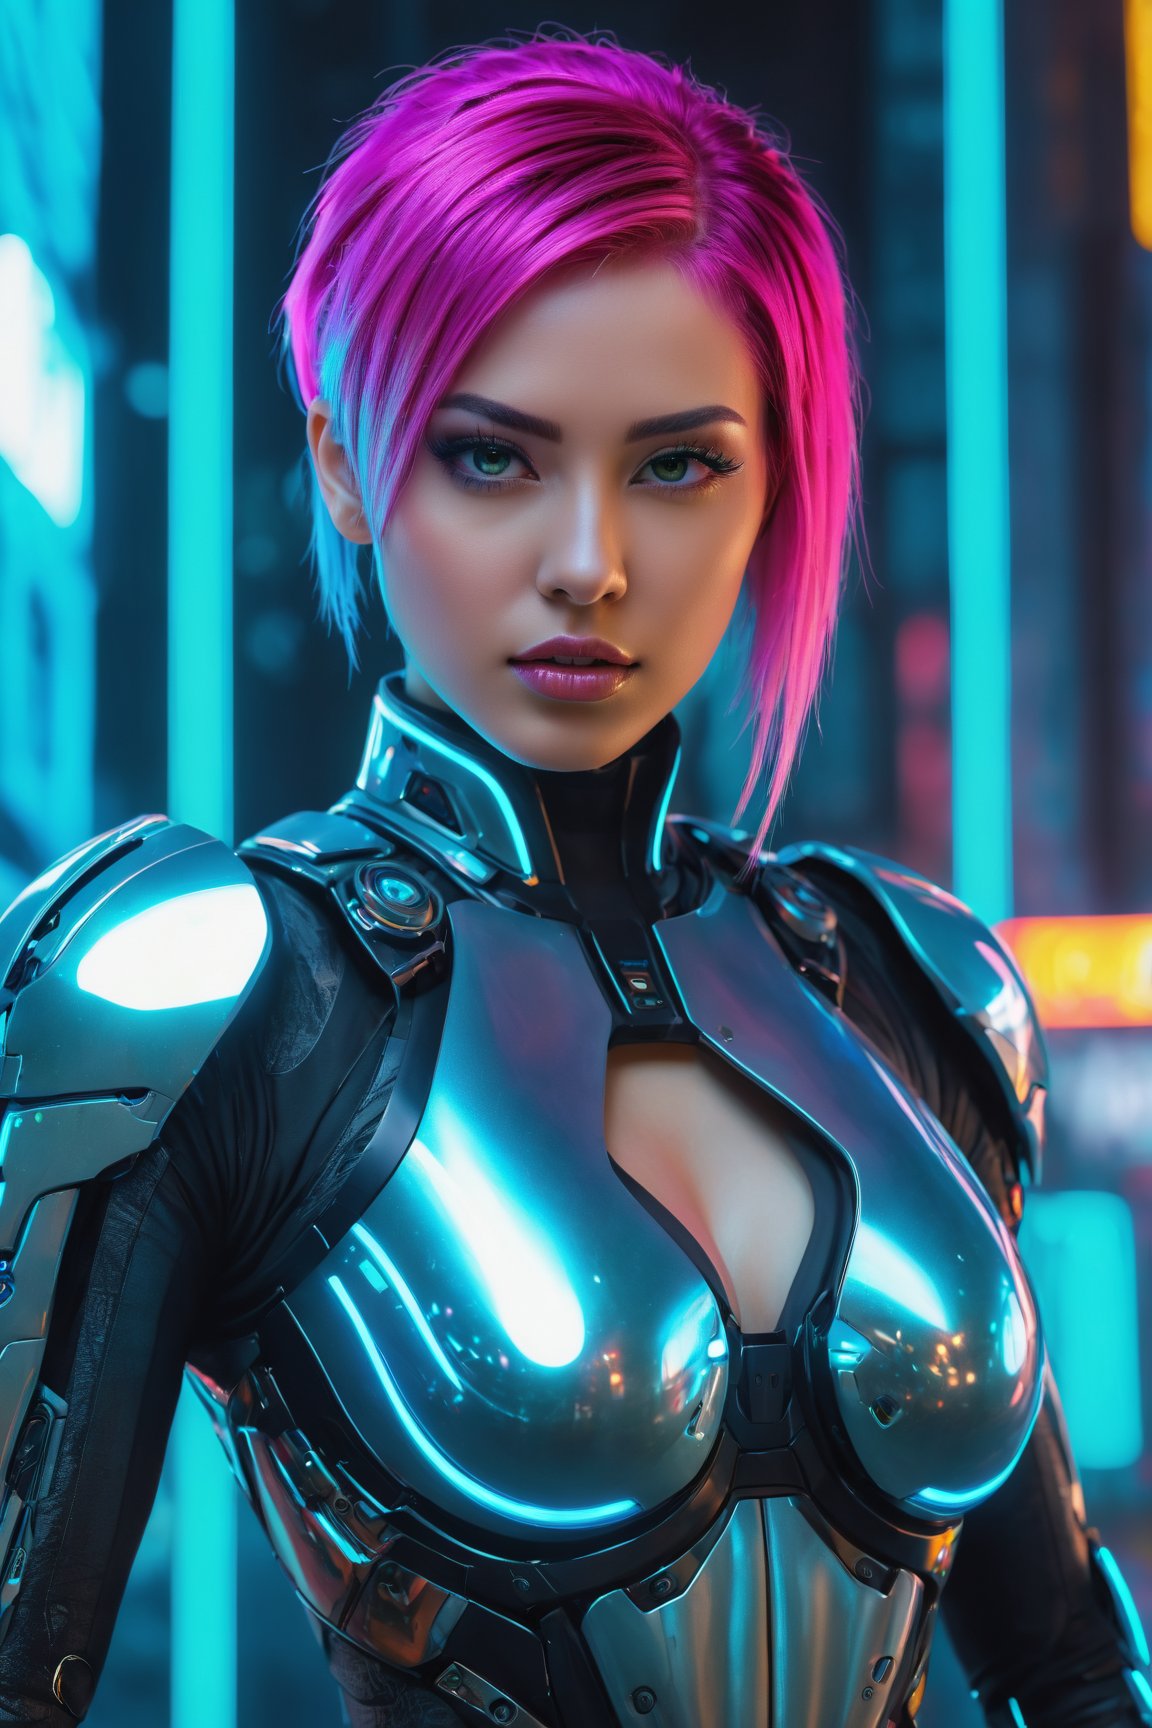 (best quality, 4k, 8k, highres, masterpiece:1.2), ultra-detailed, (realistic, photorealistic, photo-realistic:1.37), cyborg, 1girl, neon hair, niji style, futuristic, electric atmosphere, vibrant colors, glowing lights, metallic reflections, digital enhancements, energetic pose, eye-catching, artificial intelligence, tech-inspired, fluid motion, dynamic composition, sci-fi elements, urban setting, gritty background, dystopian vibes, edgy fashion, cyberpunk aesthetics, holographic effects, retro-futurism, synthetic beauty, neon signs, rich textures, immersive experience, advanced technology, cybernetic enhancements, otherworldly, expressive eyes, mechanical details, modern art, unique perspective, experimental, cosmic energy, nanoscale implants, ethereal presence, augmented reality, creative expression, limitless possibilities,<lora:EMS-89672-EMS:0.800000>